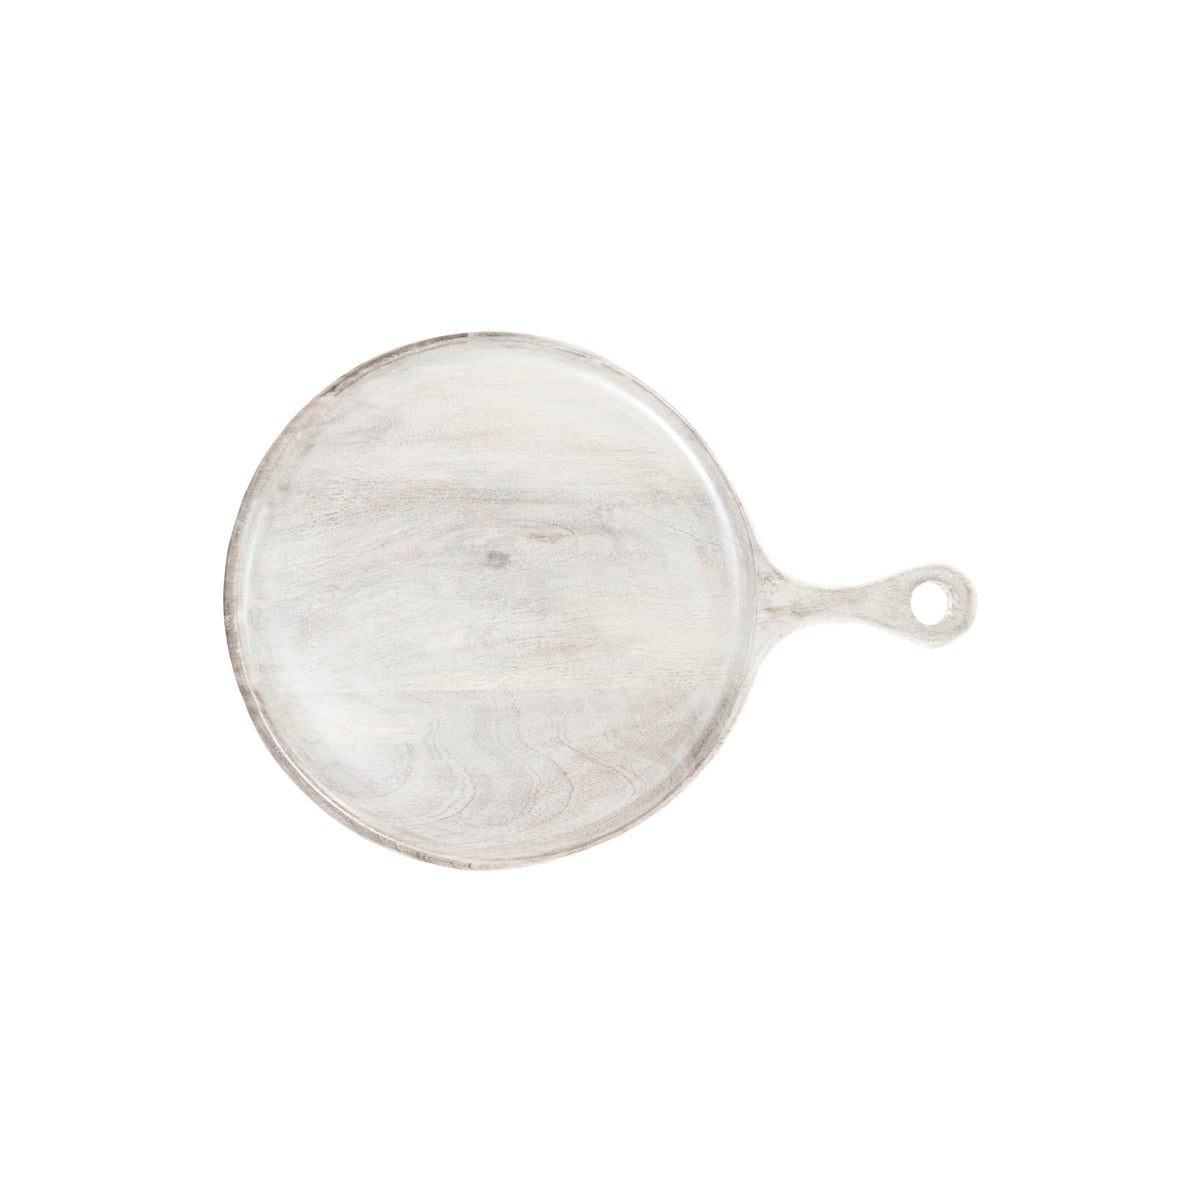 '04815 Chef Inox Mangowood Round Serving Board with Handle White 300x15mm Tomkin Australia Hospitality Supplies